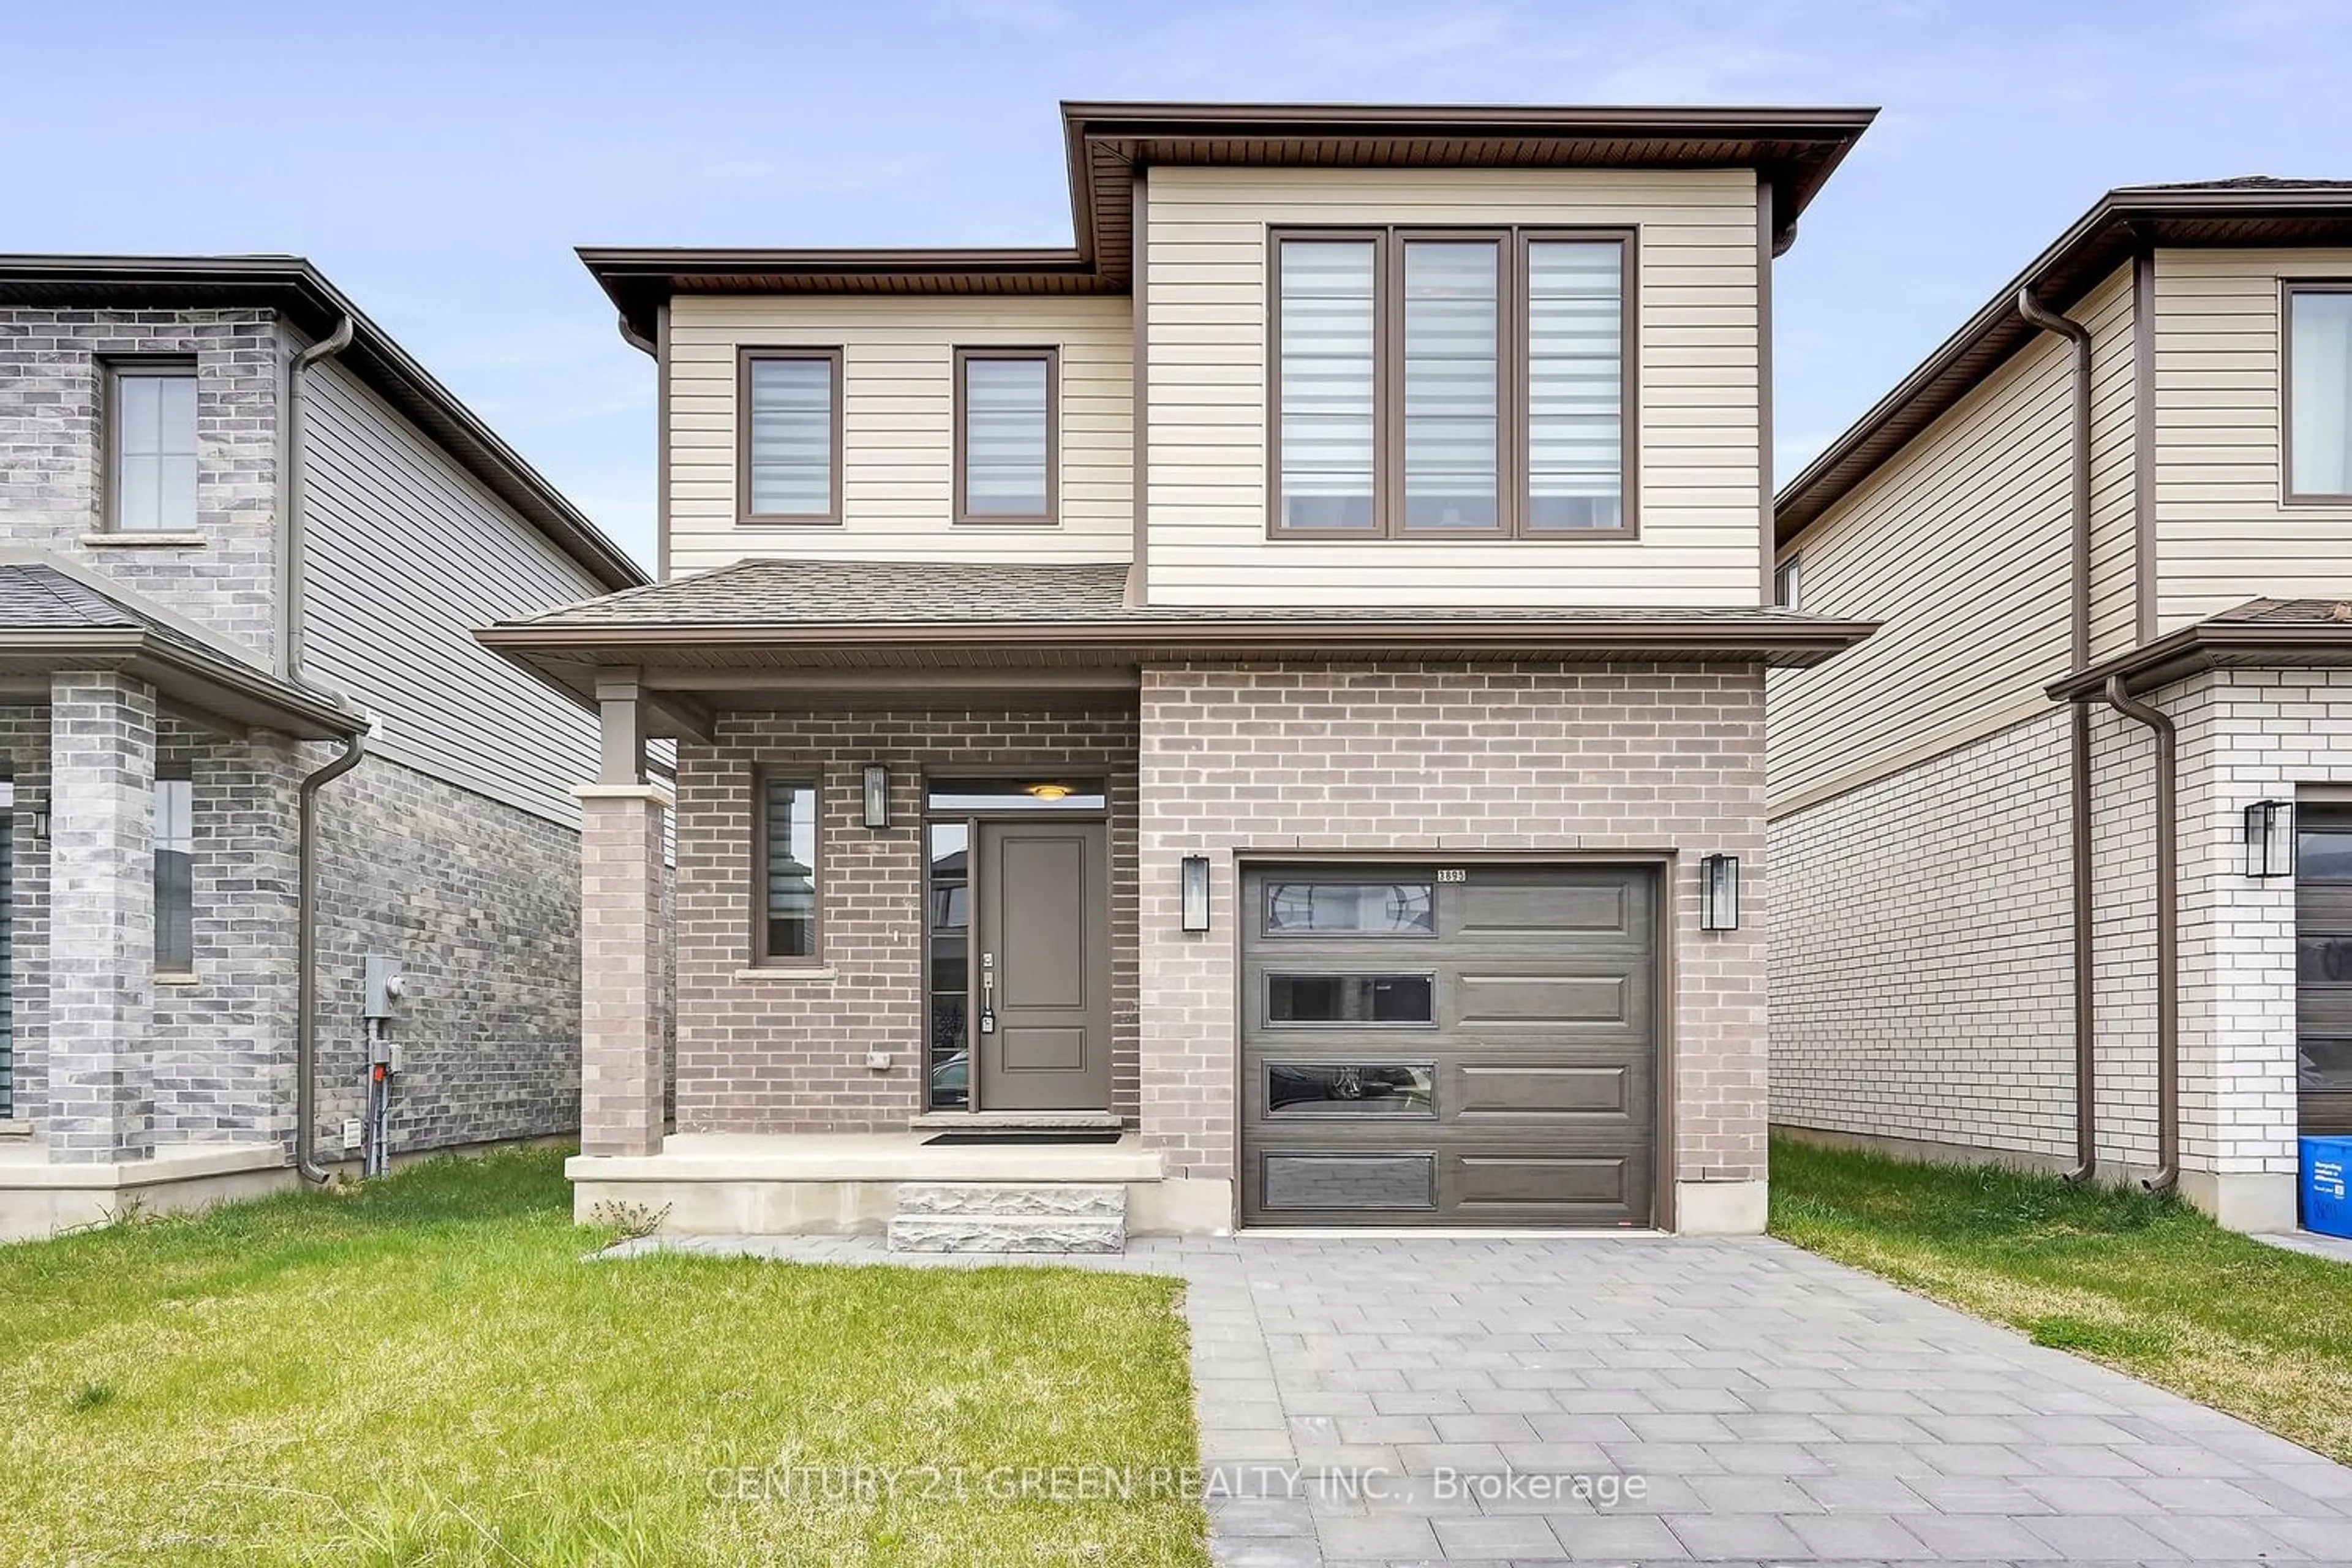 Home with brick exterior material for 3895 Auckland Ave, London Ontario N6L 0J3